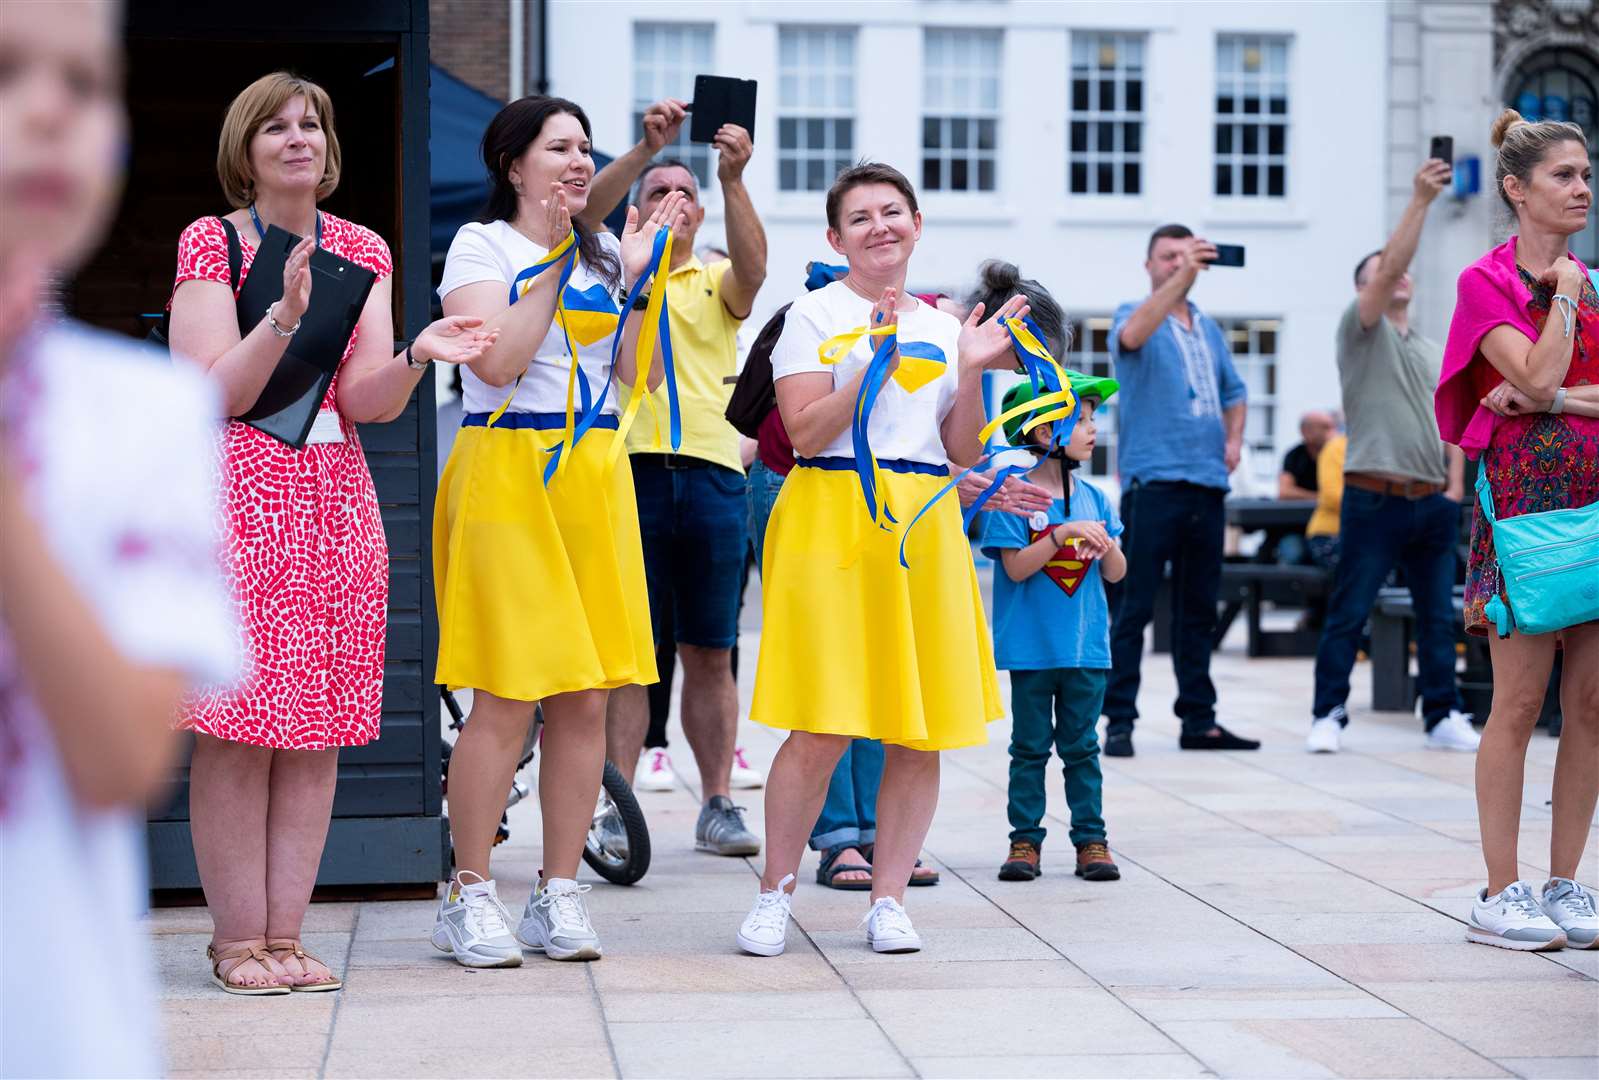 Blue and yellow took over the Tuesday Market Place. Picture: Ian Burt